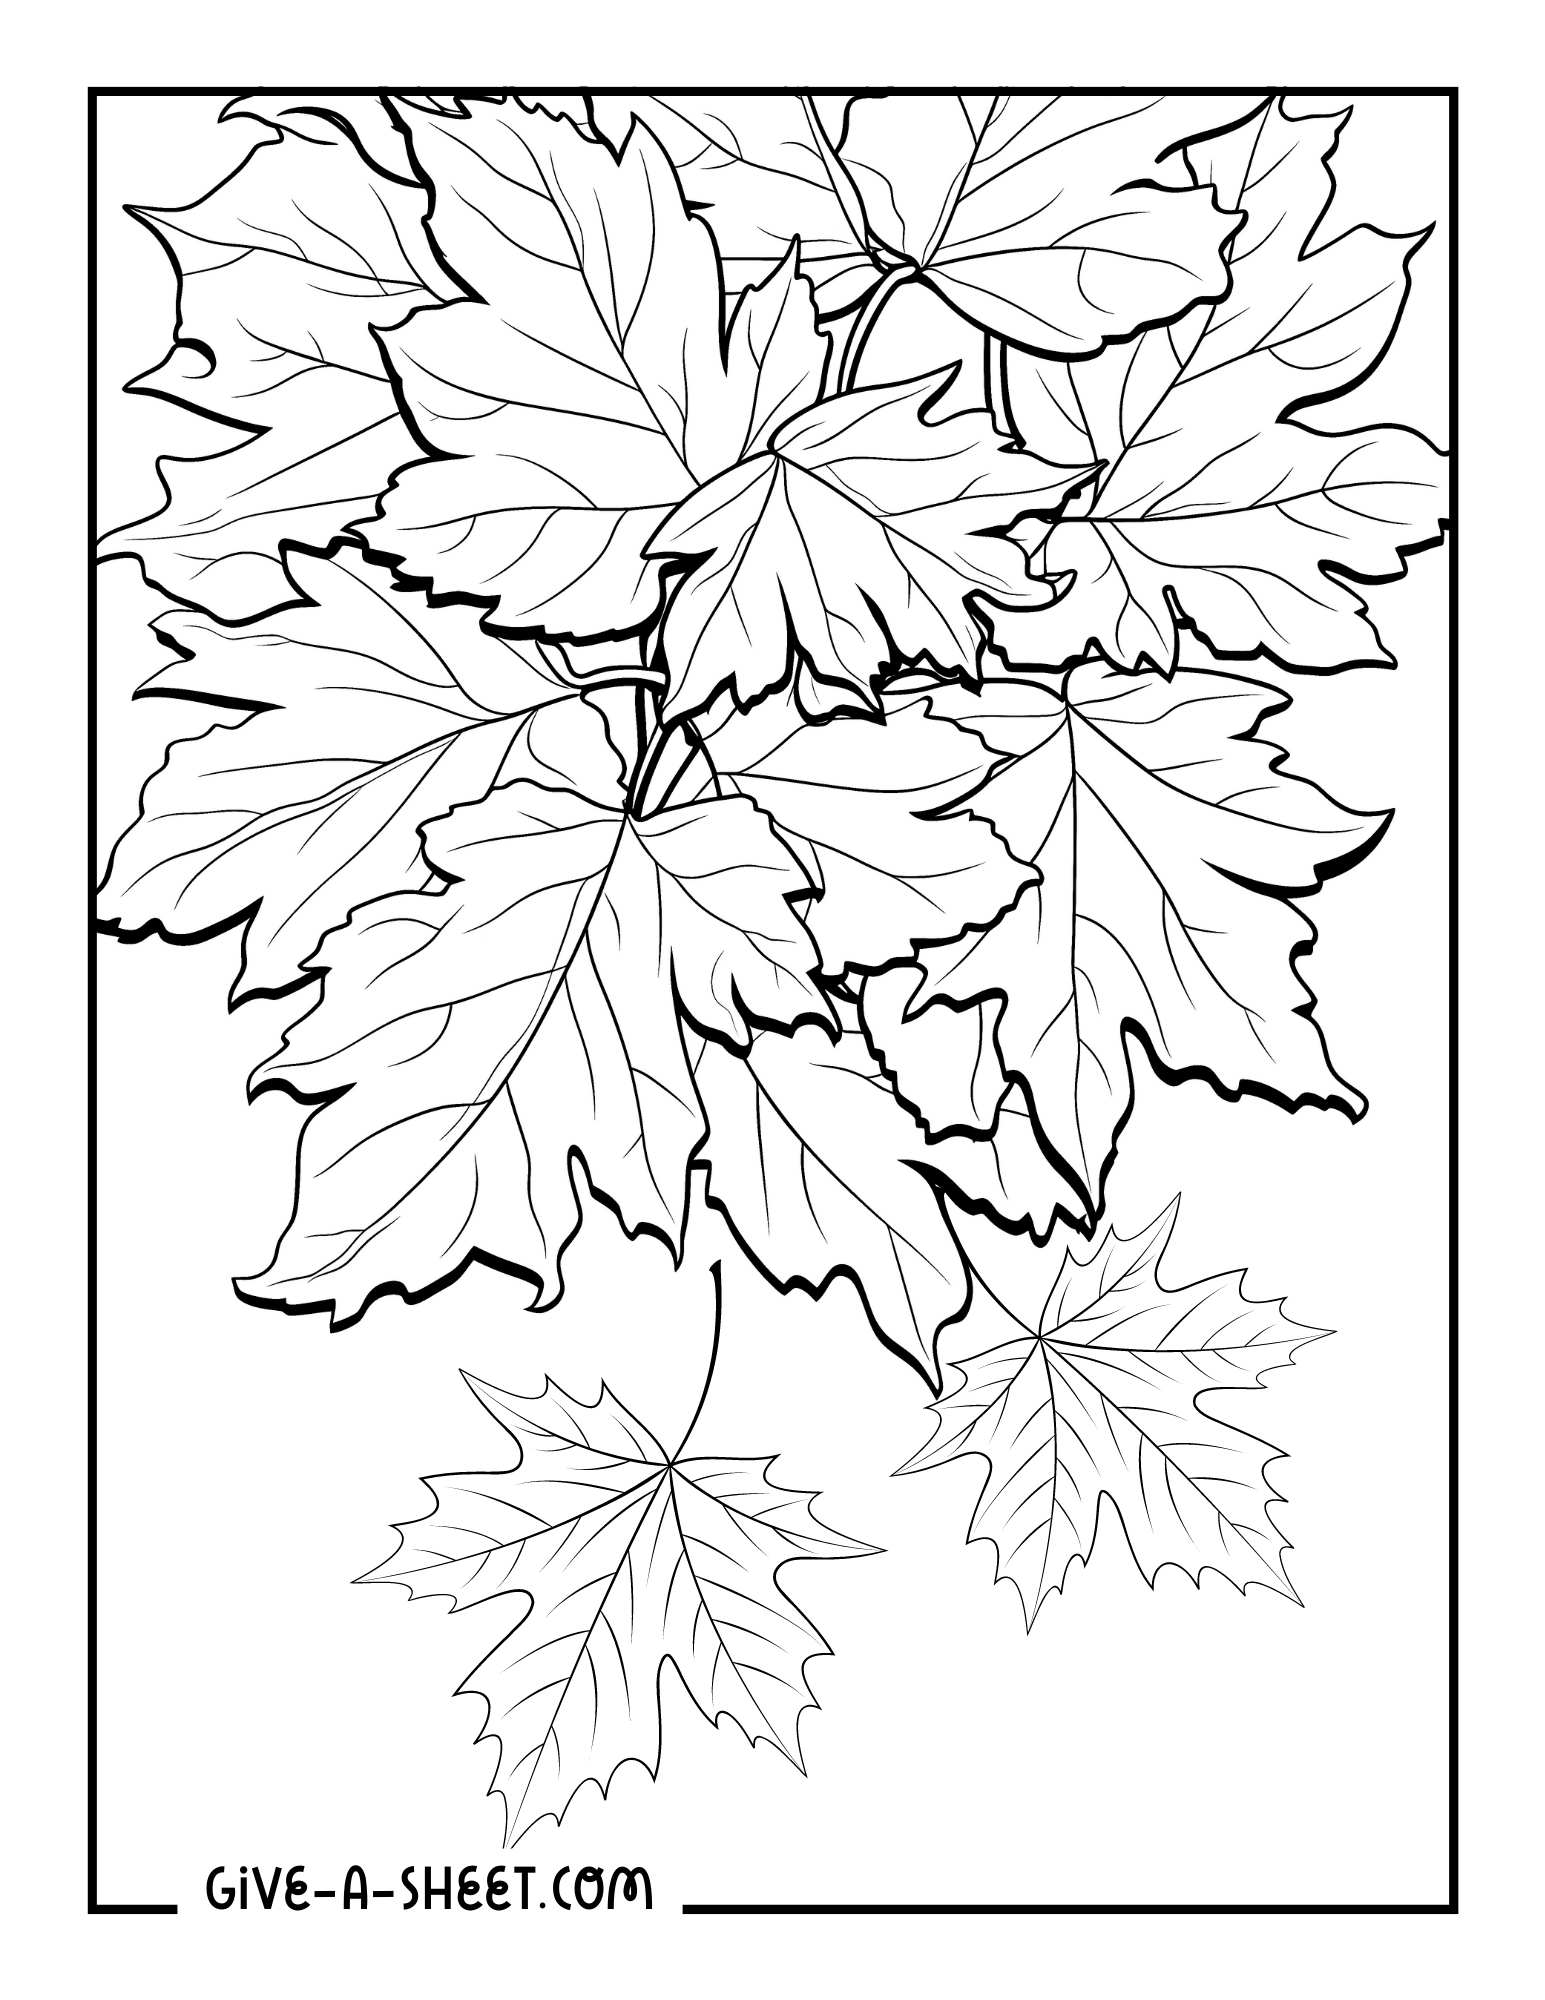 Maple leaf intricate designs coloring page for adults.